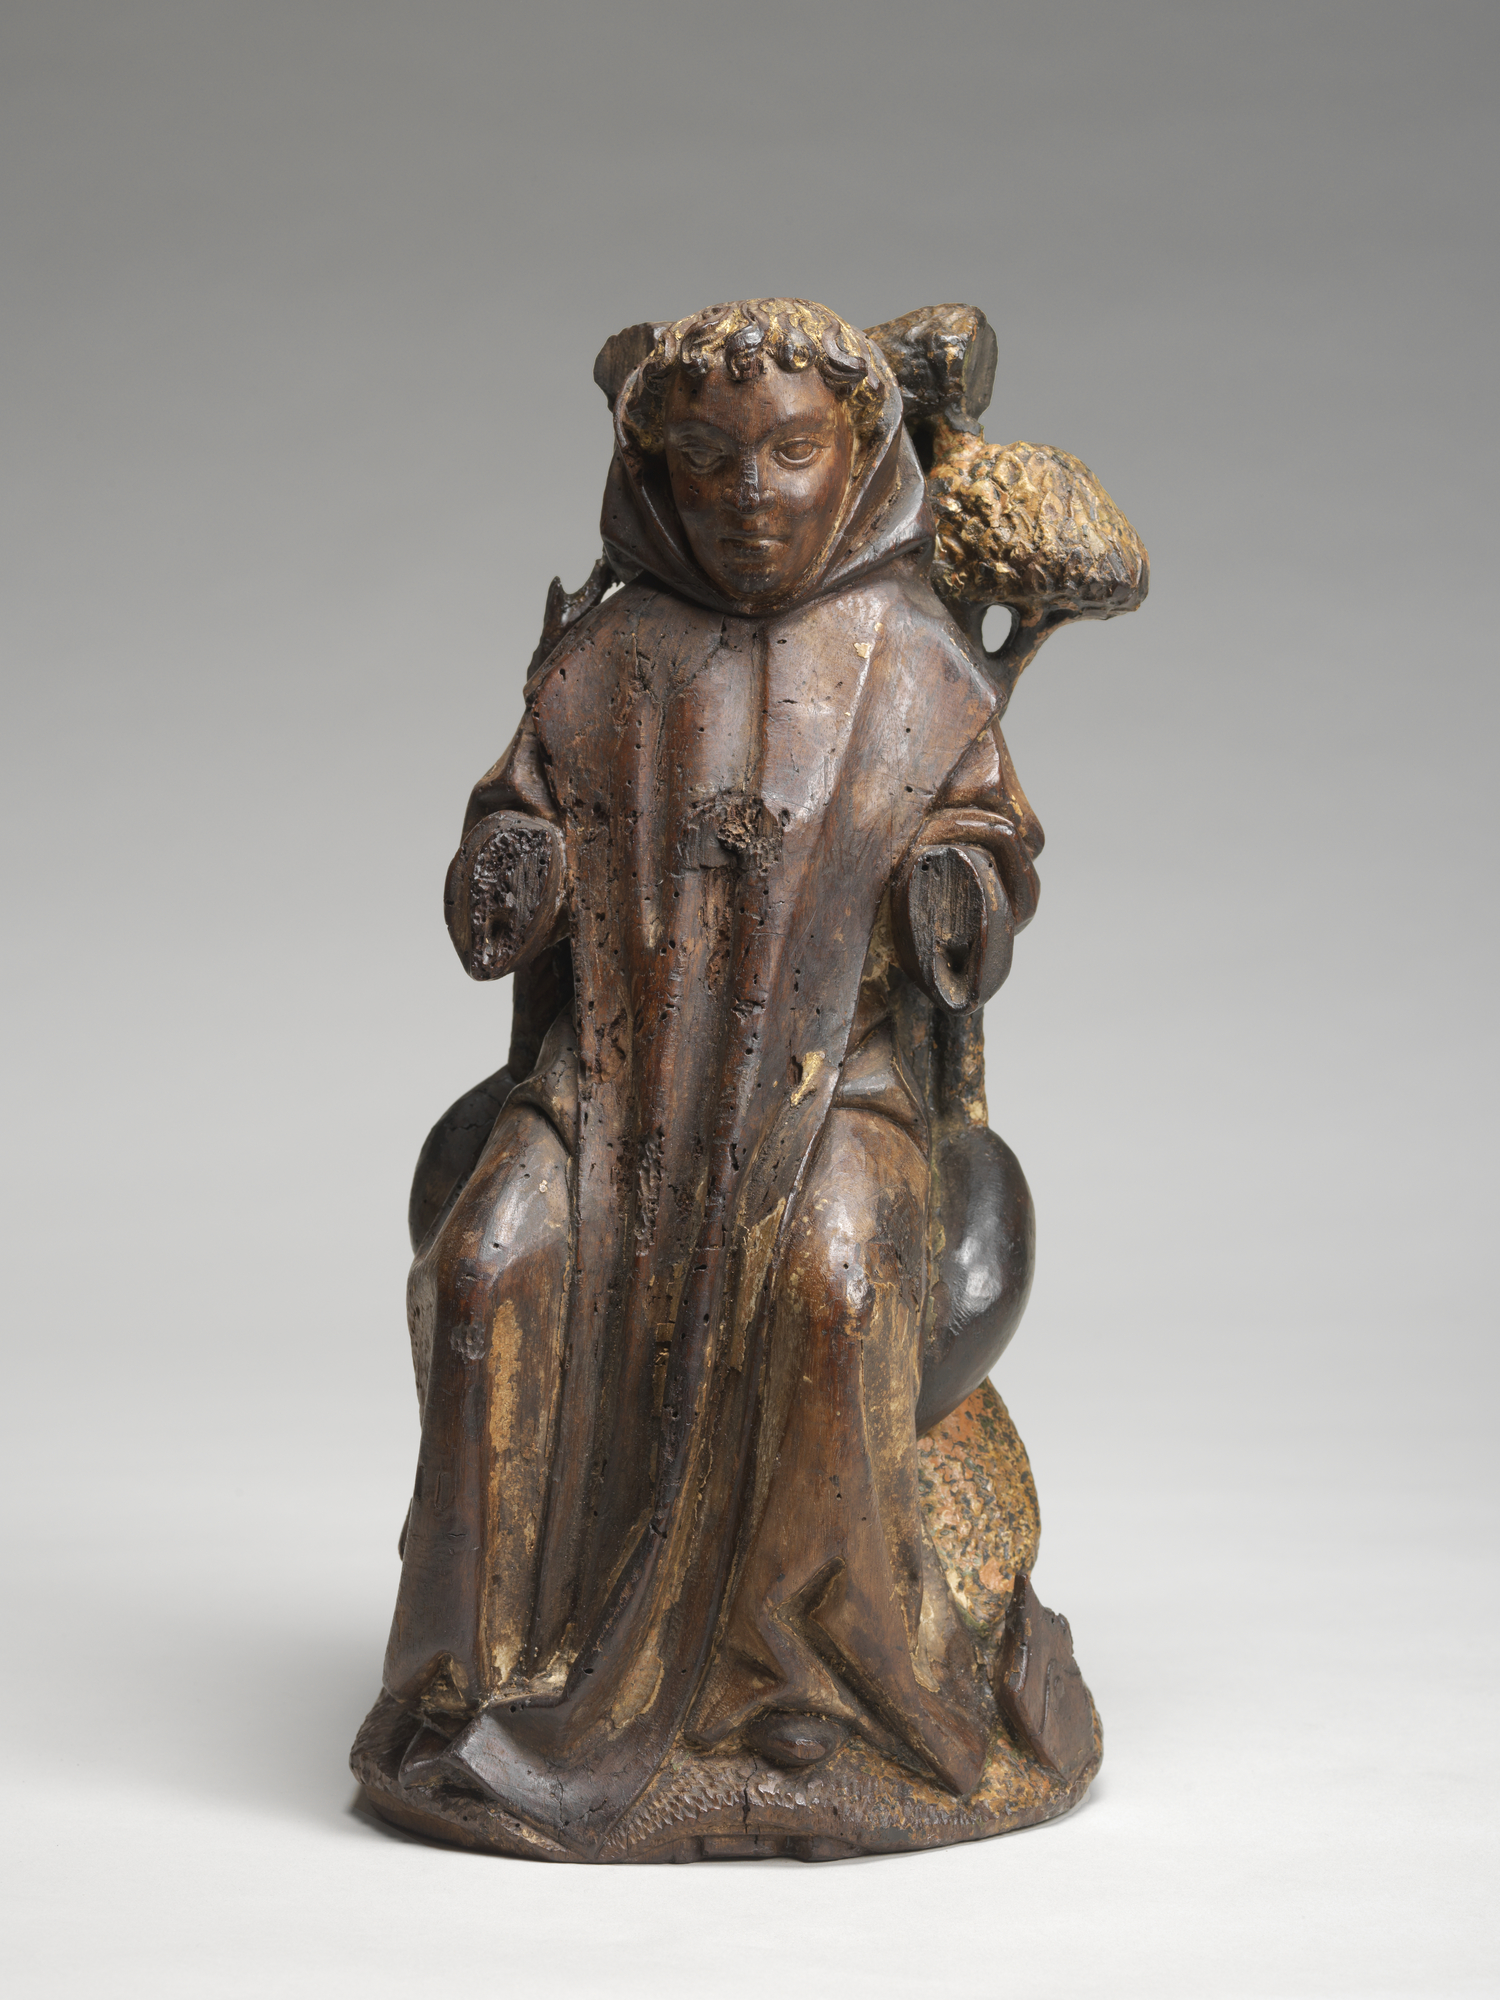 Image of wooden sculpture of a seated figure